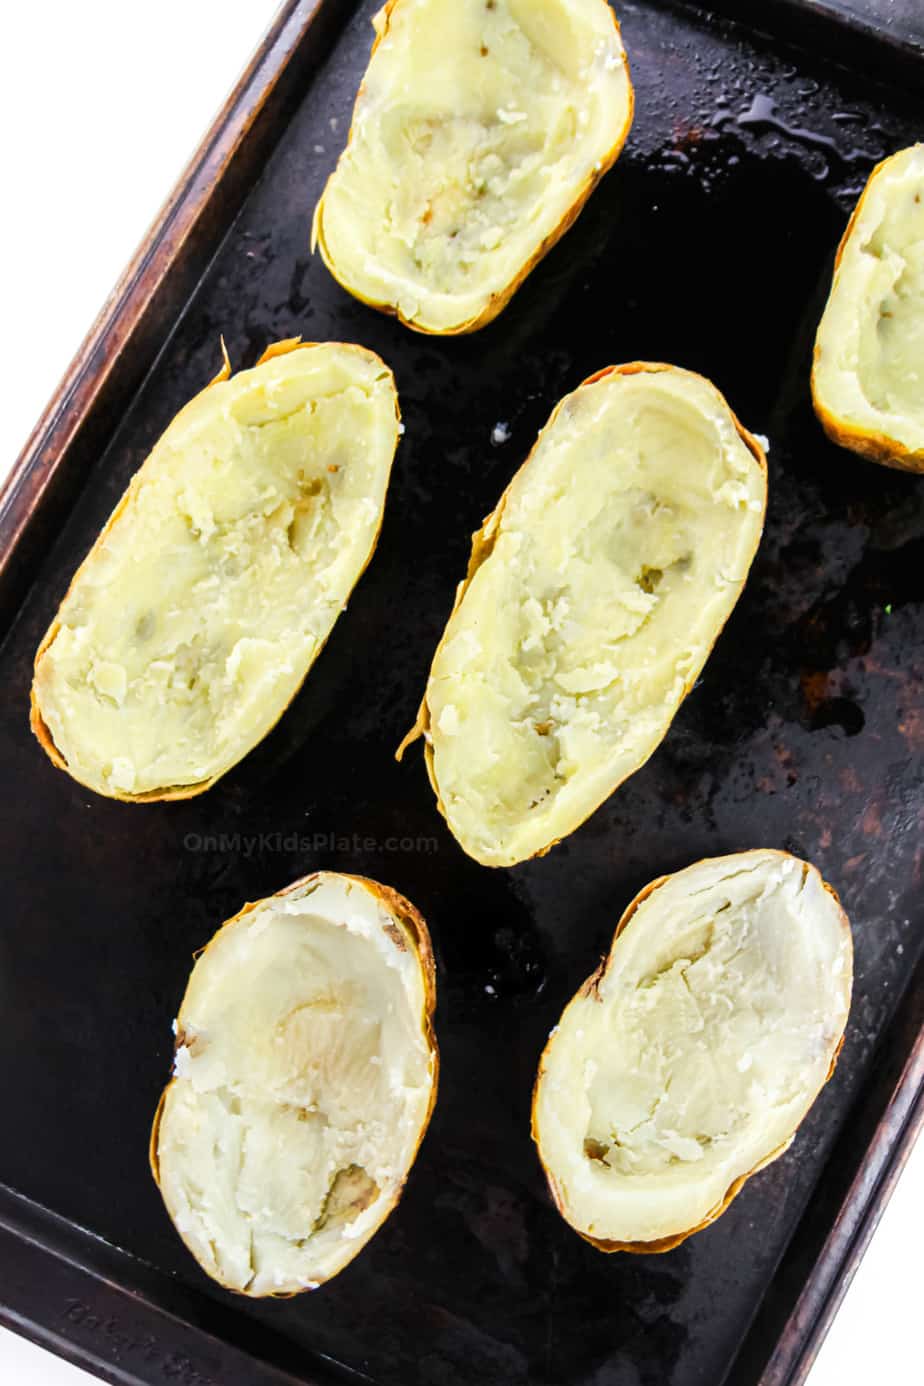 Cooked potato halves on a pan that have had the soft potato inside scooped out.